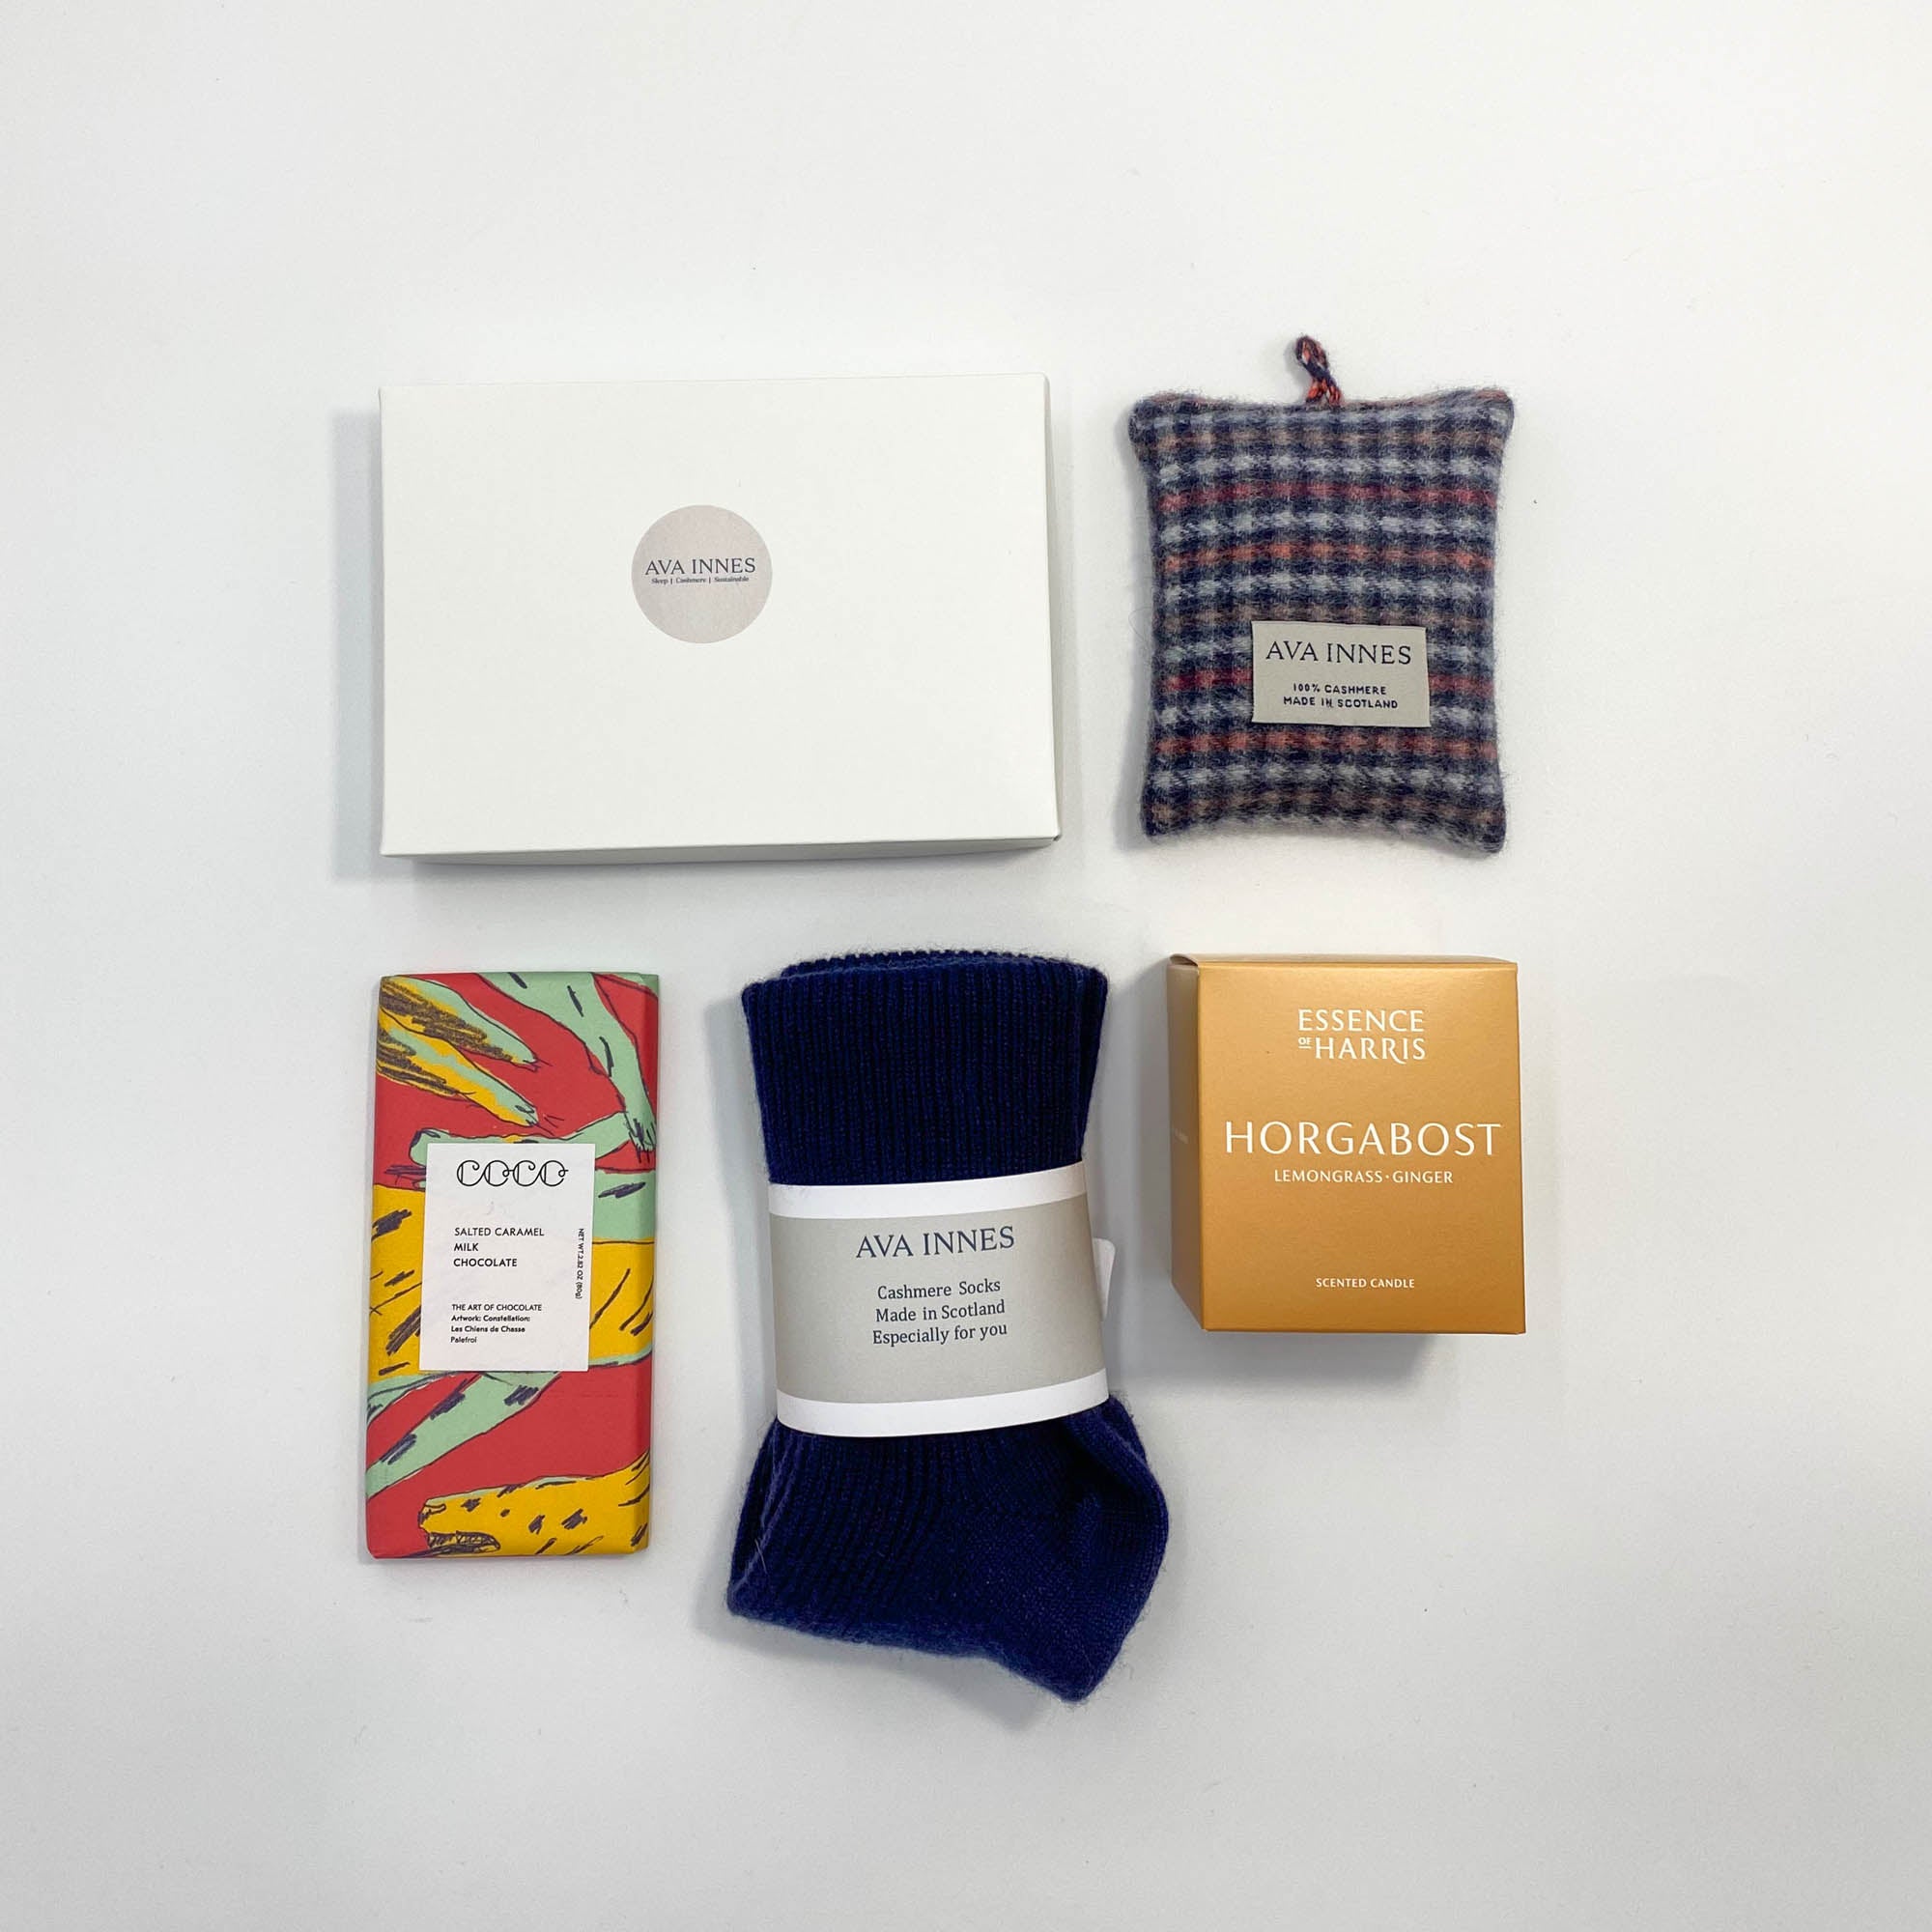 Luxury Cashmere Rest and Relax Gift Box, Ava Innes